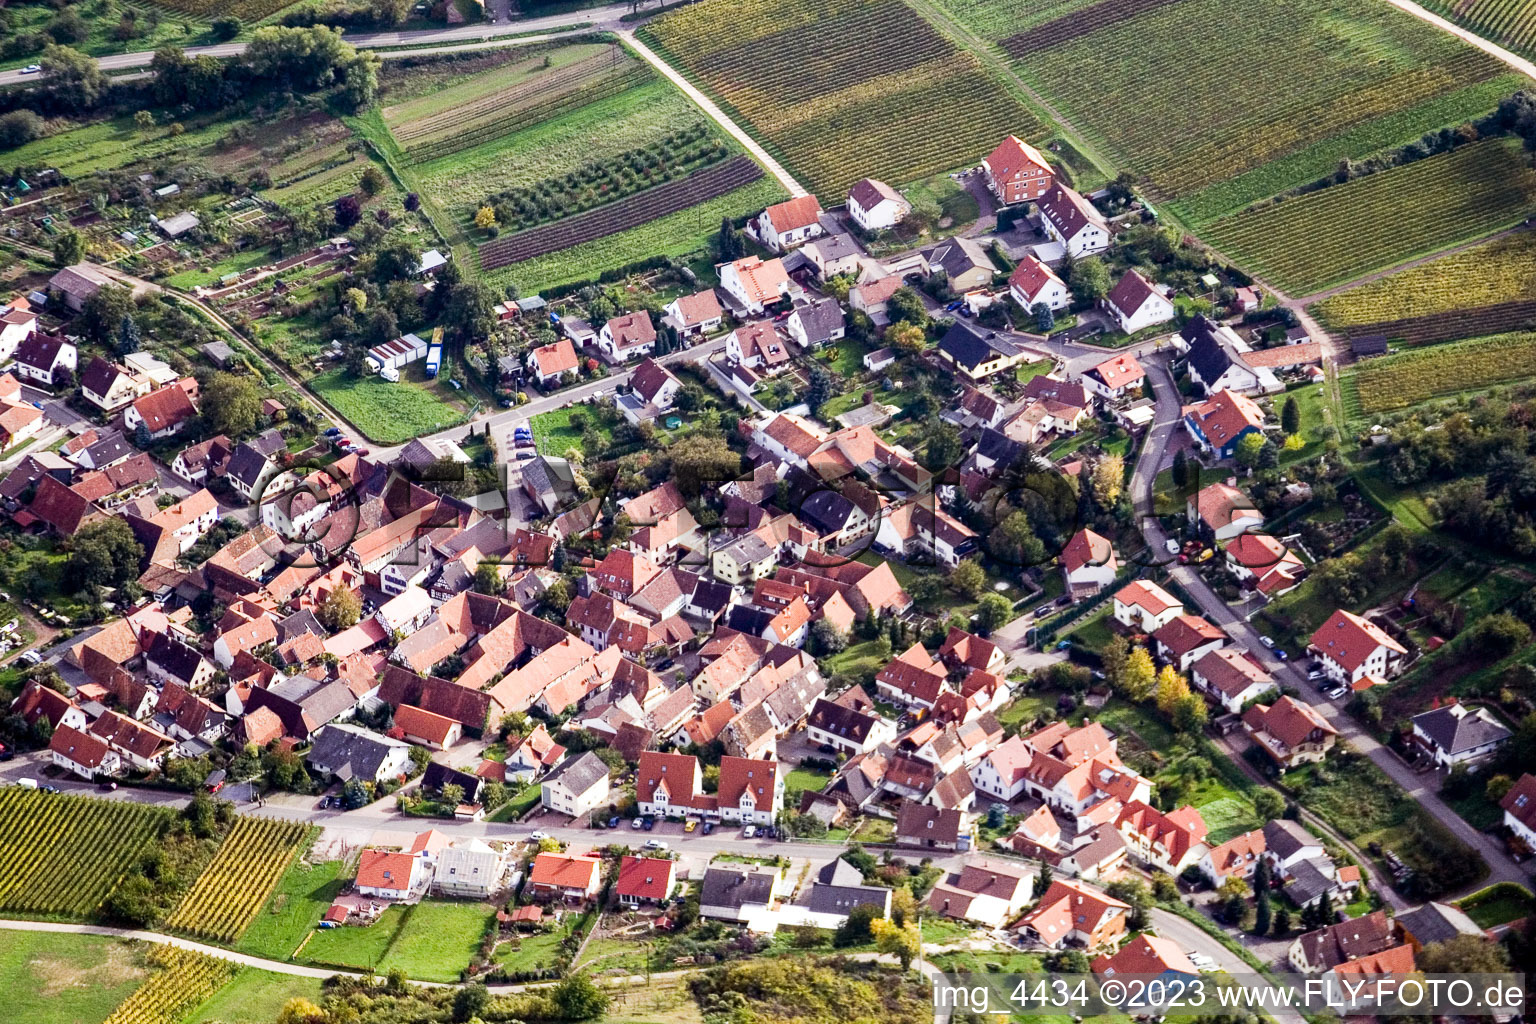 Aerial photograpy of Track cells-Gleishohrbach in the district Gleishorbach in Gleiszellen-Gleishorbach in the state Rhineland-Palatinate, Germany